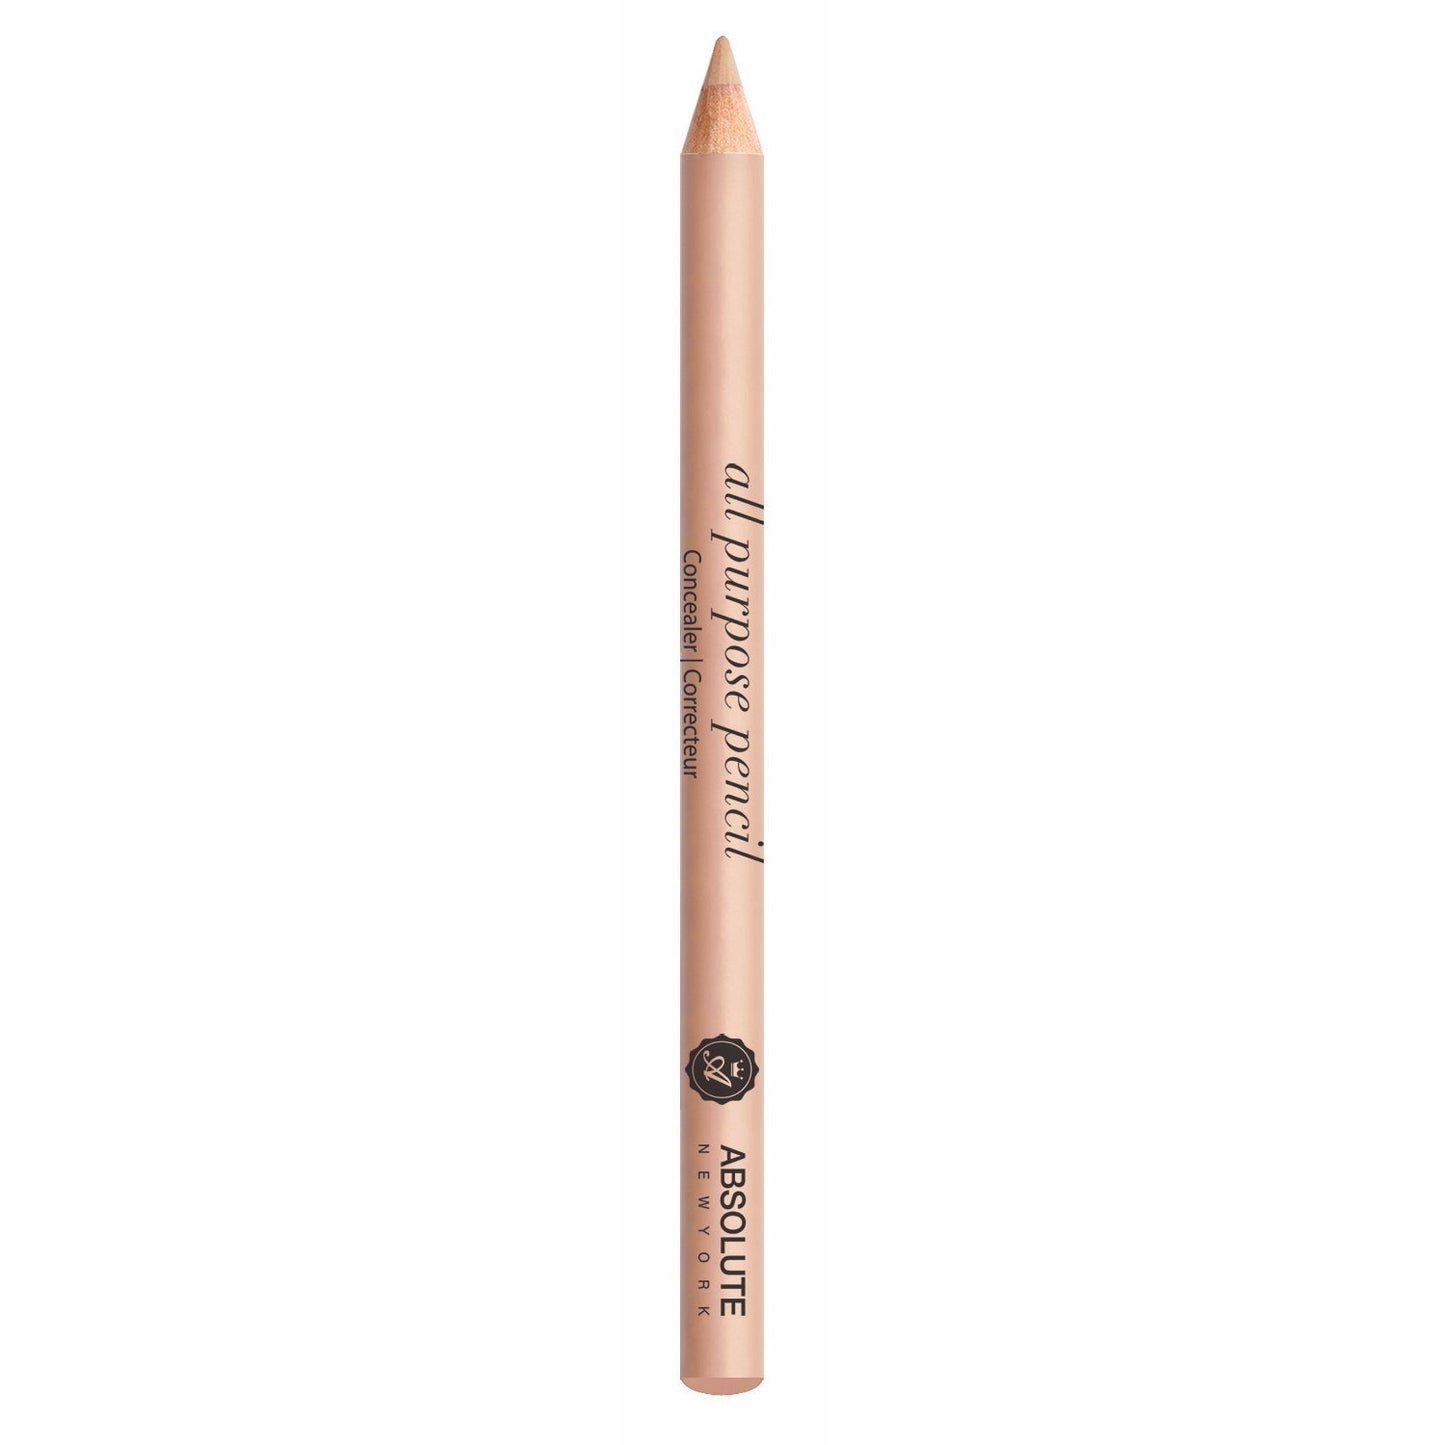 ABSOLUTE All Purpose Pencil Concealer